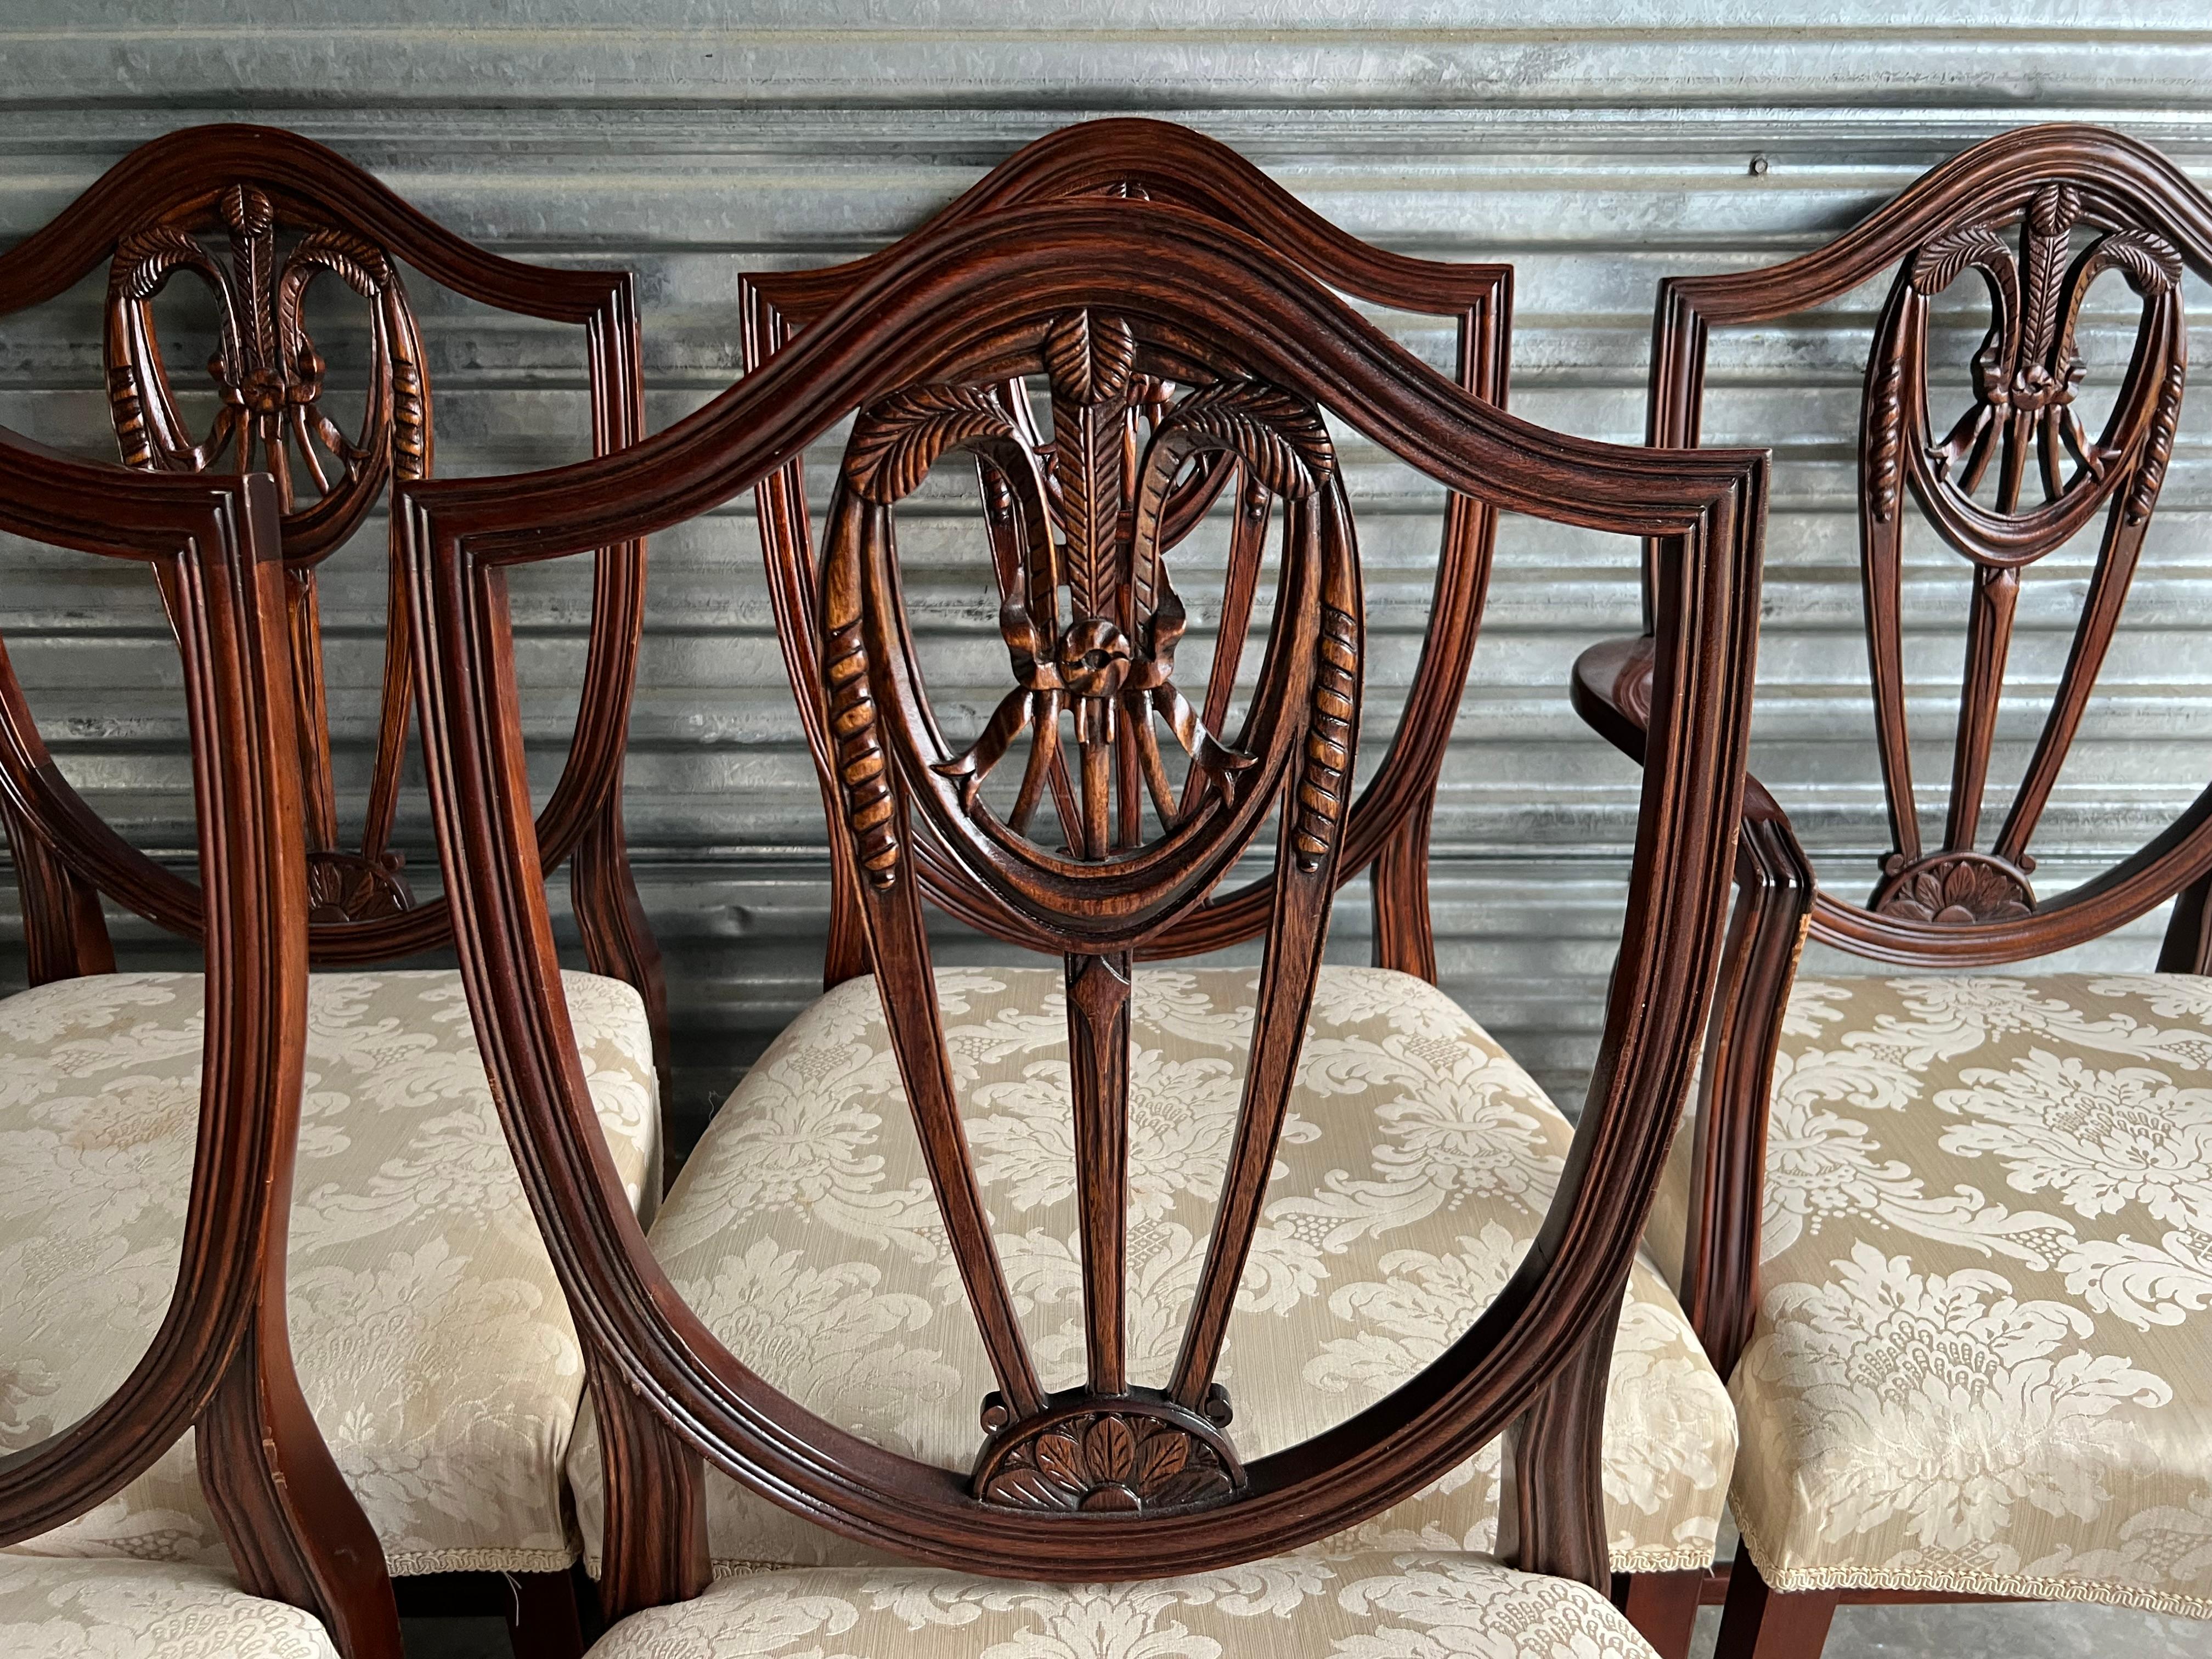 20th Century English Mahogany Hepplewhite Style Dining Chairs by Bevan Funnell Ltd., S/6